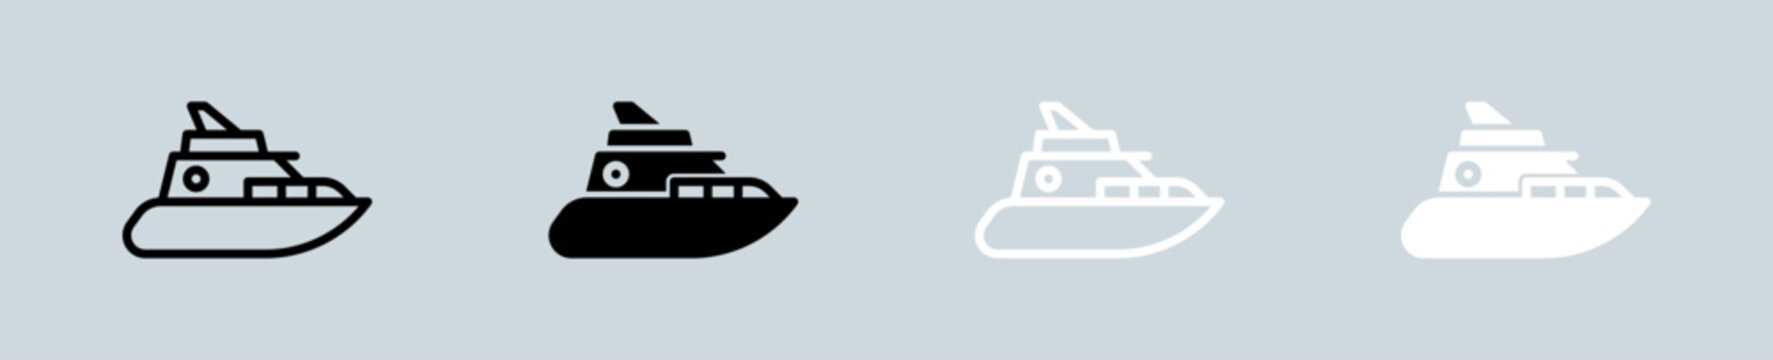 Yacht icon set in black and white. Ship signs vector illustration.